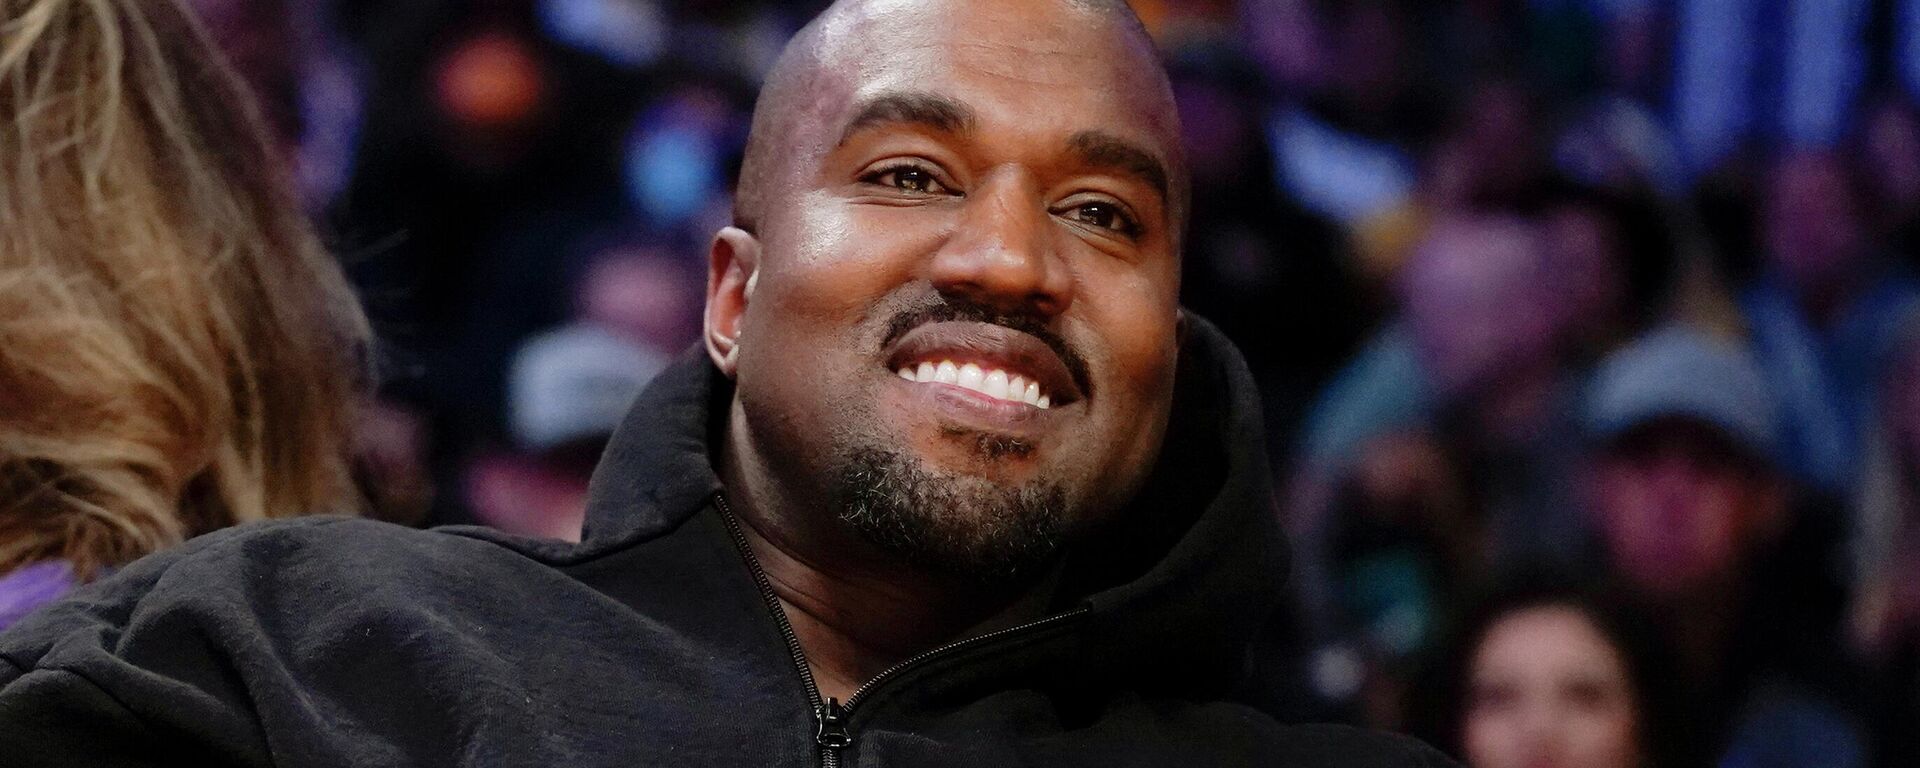 Kanye West watches the first half of an NBA basketball game between the Washington Wizards and the Los Angeles Lakers in Los Angeles, on March 11, 2022. A documentary about the rapper formerly known as Kanye West has been shelved amid his recent slew of antisemitic remarks. - Sputnik International, 1920, 25.01.2023